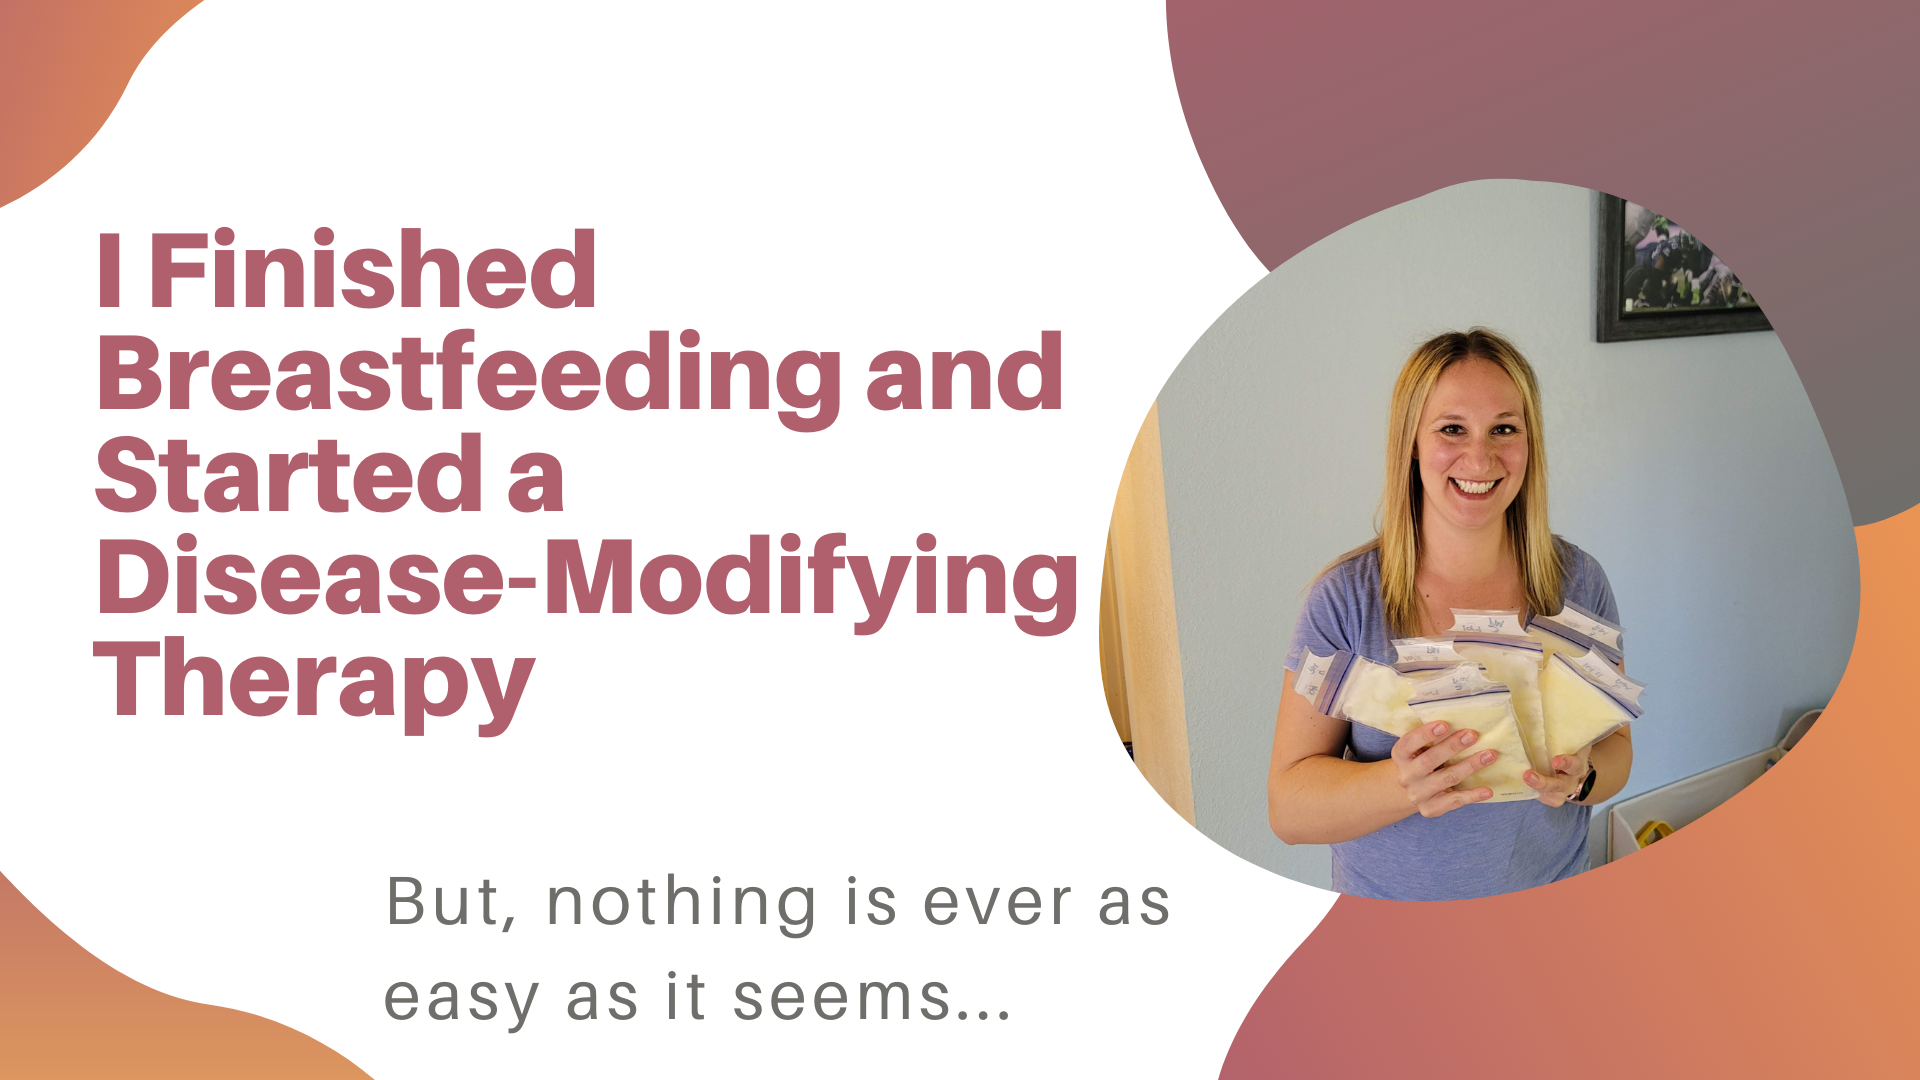 I Finished Breastfeeding and Started a Disease Modifying Therapy